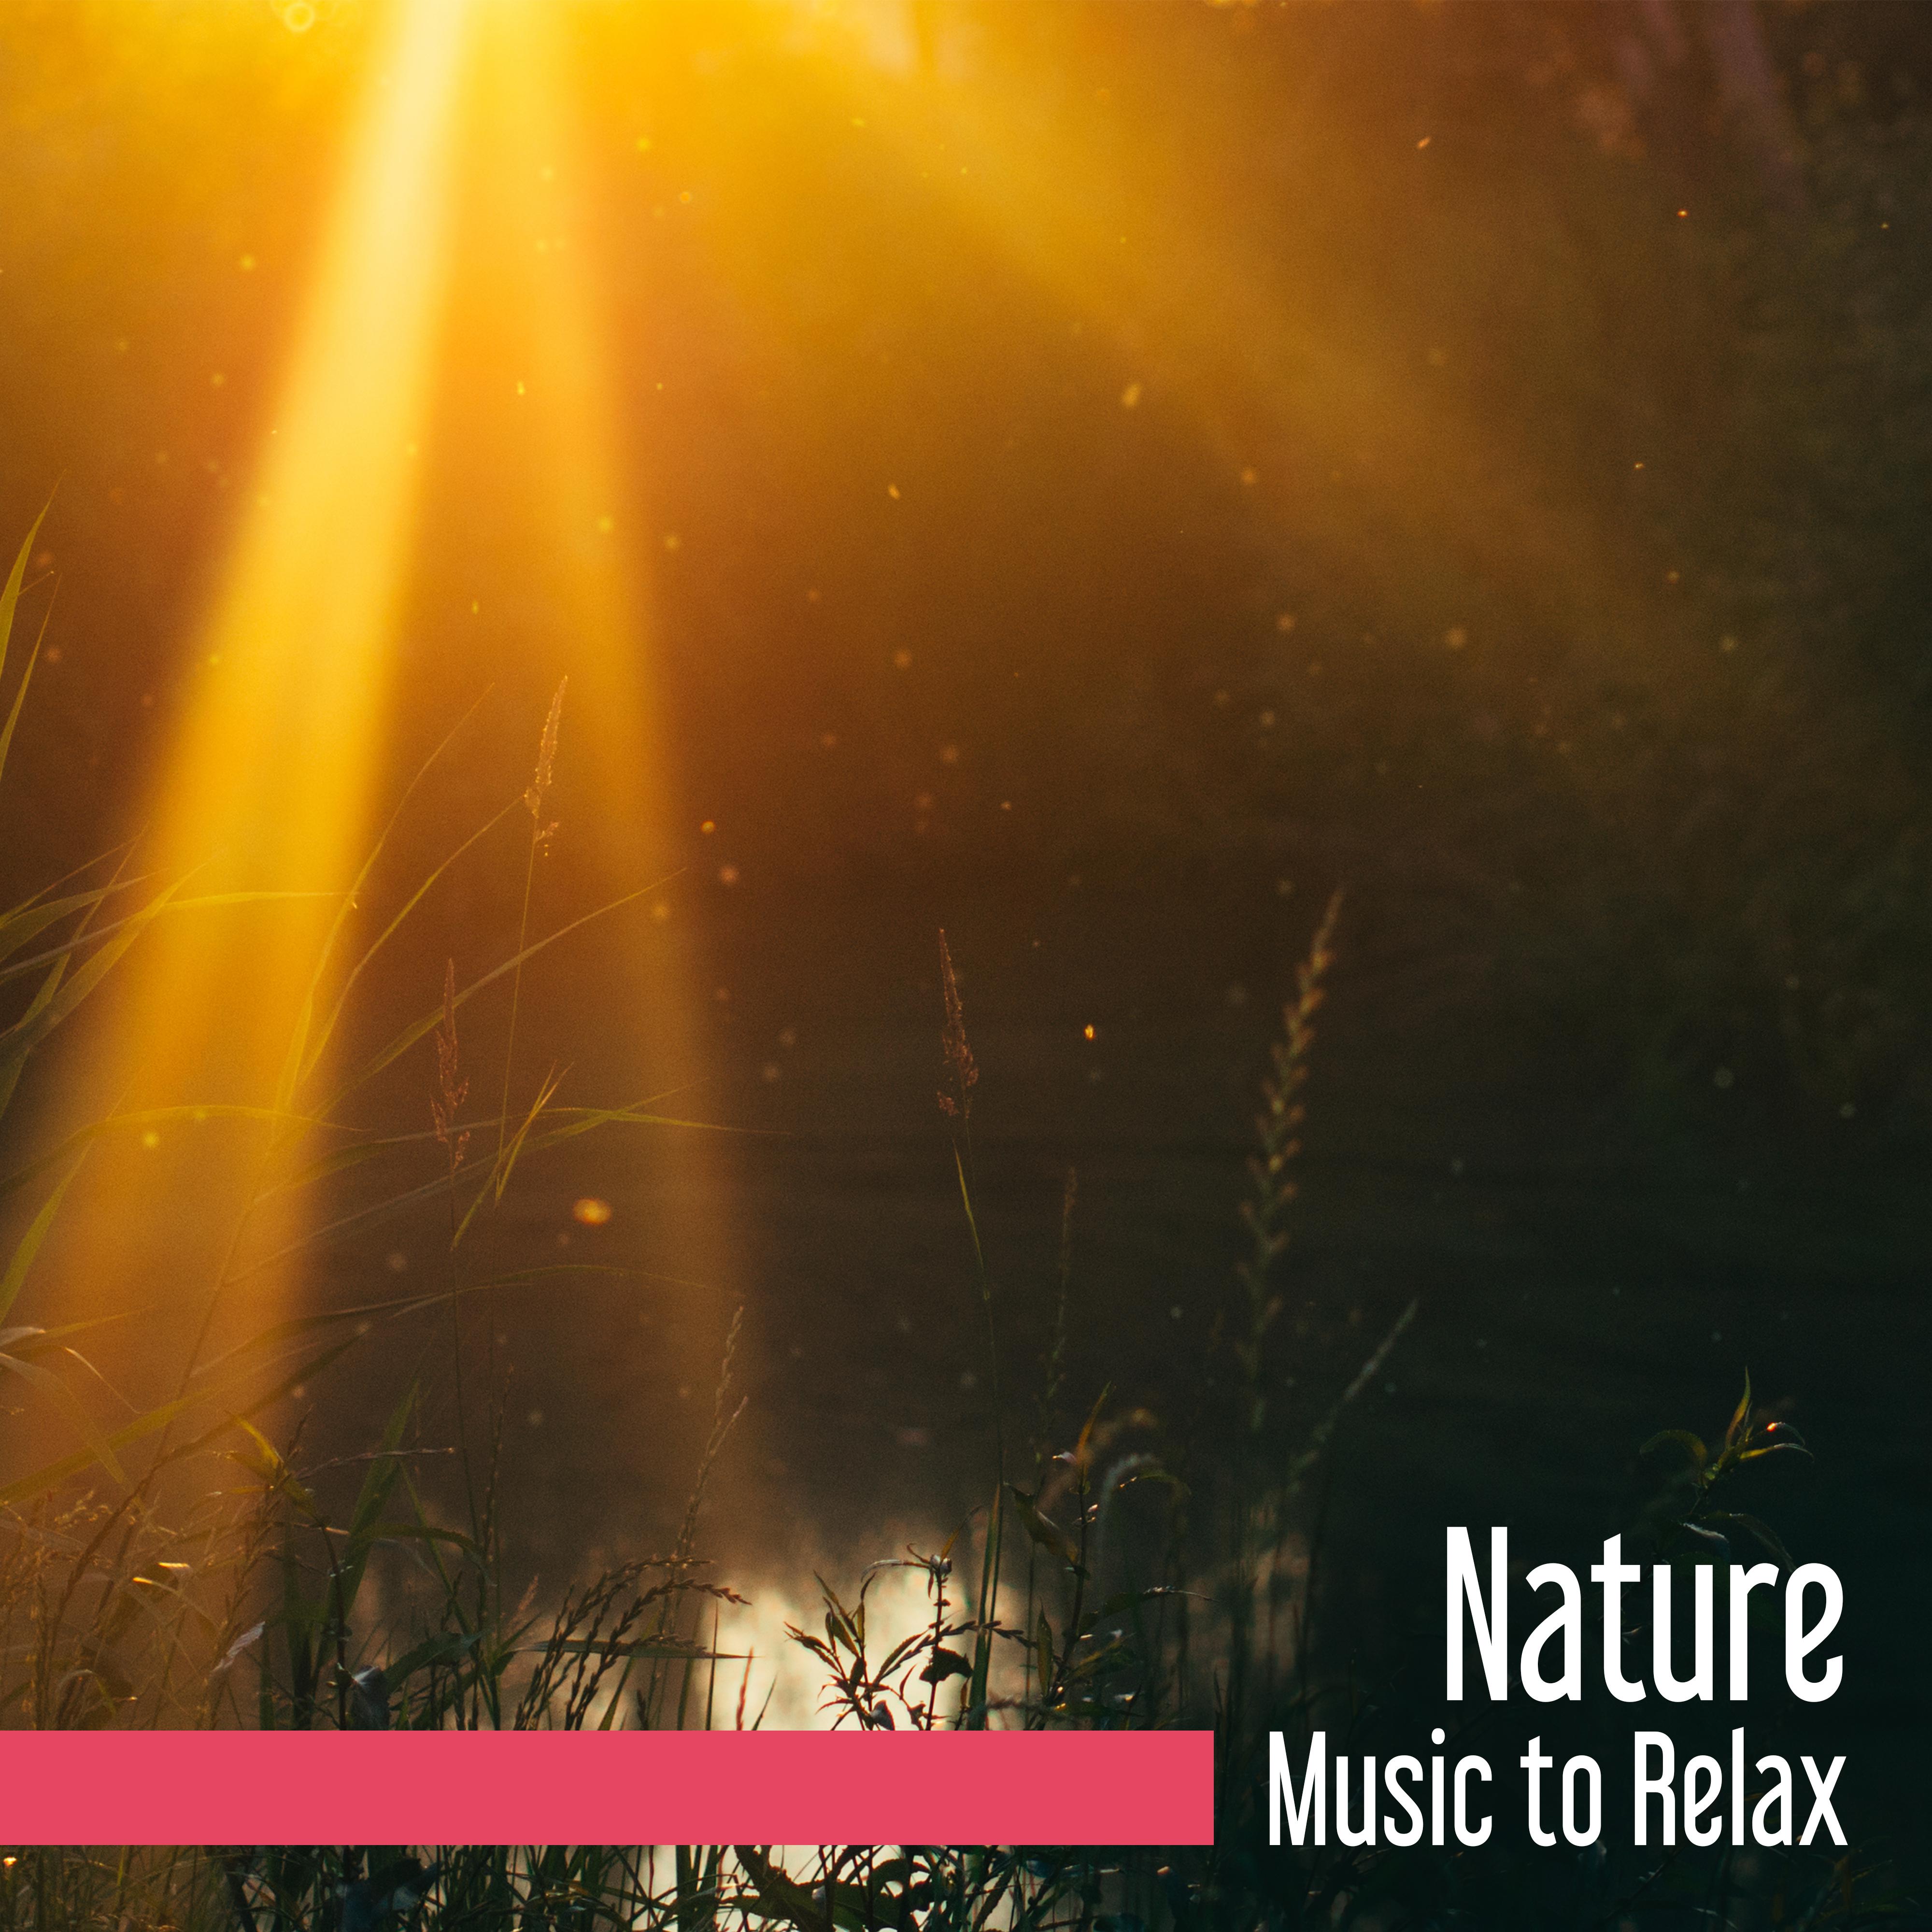 Nature Music to Relax  Easy Listening, Soothing Nature Sounds, Calm Your Mind, Peaceful Songs